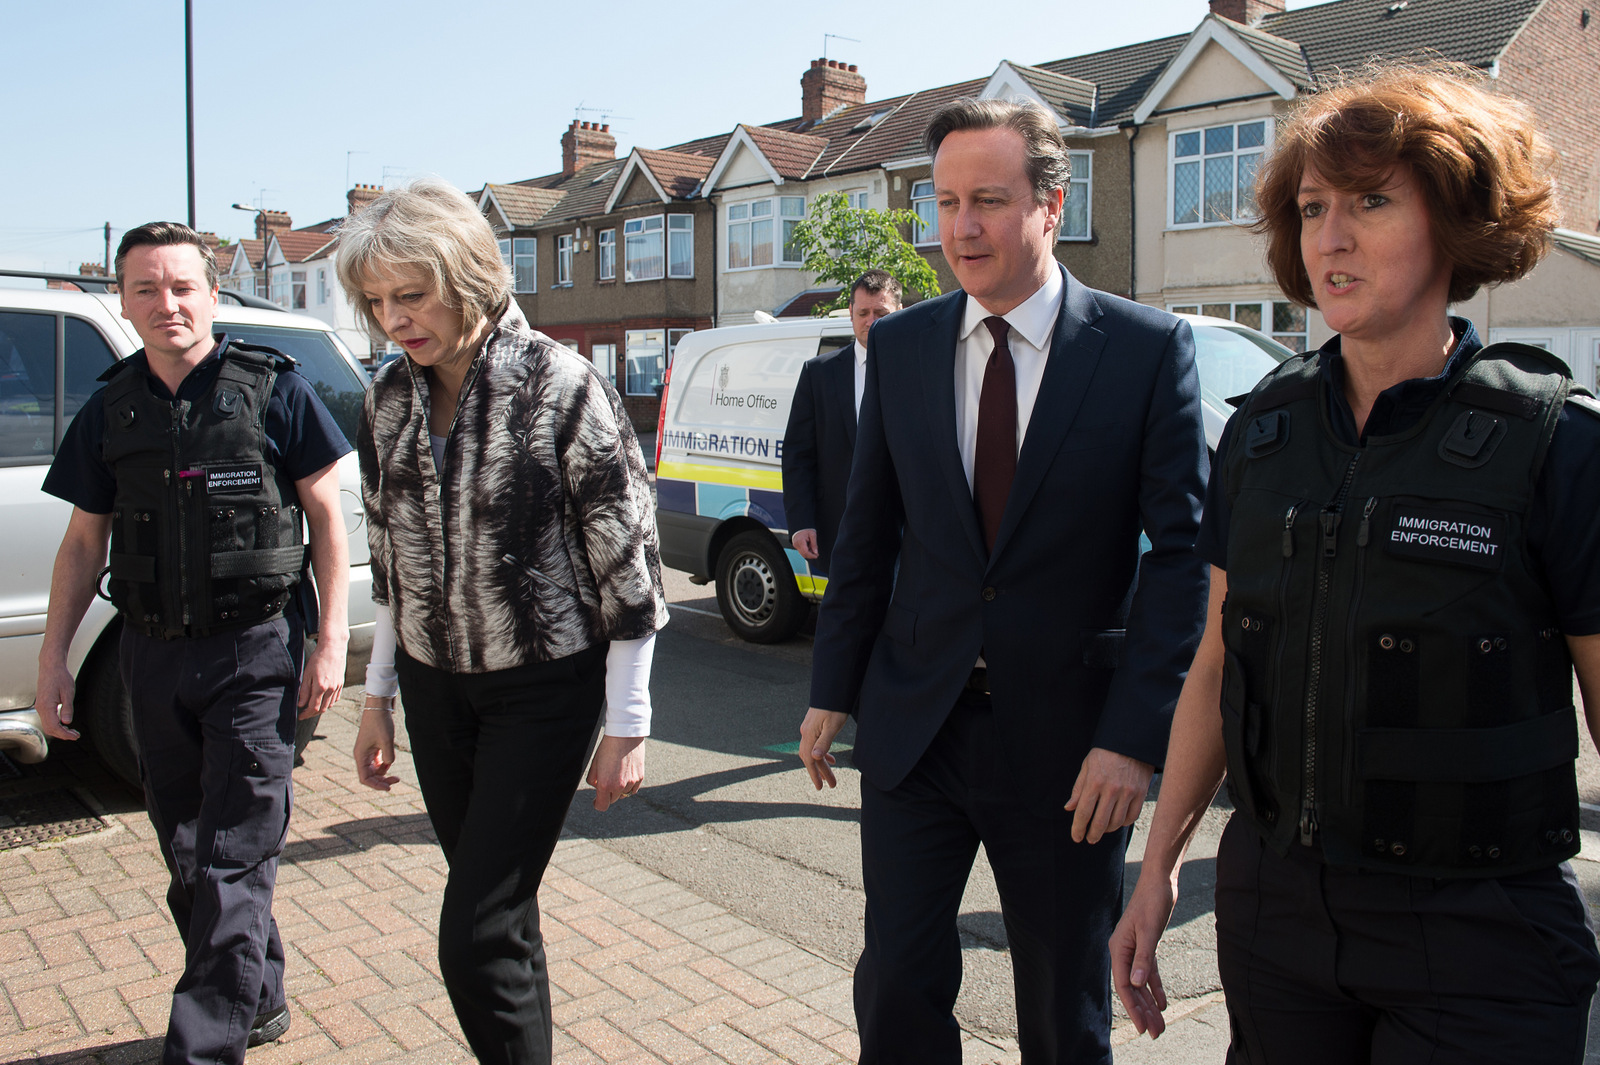 Britain's Prime Minister David Cameron and Home Secretary Theresa May talk to Immigration Enforcement officers after officers raided residential properties looking for illegal immigrants in Southall, London, Thursday May 21, 2015. Cameron on Thursday announced strict new measures designed to control immigration to Britain as new official figures show increasing levels of migration. (Laura Lean/Pool Photo via AP)